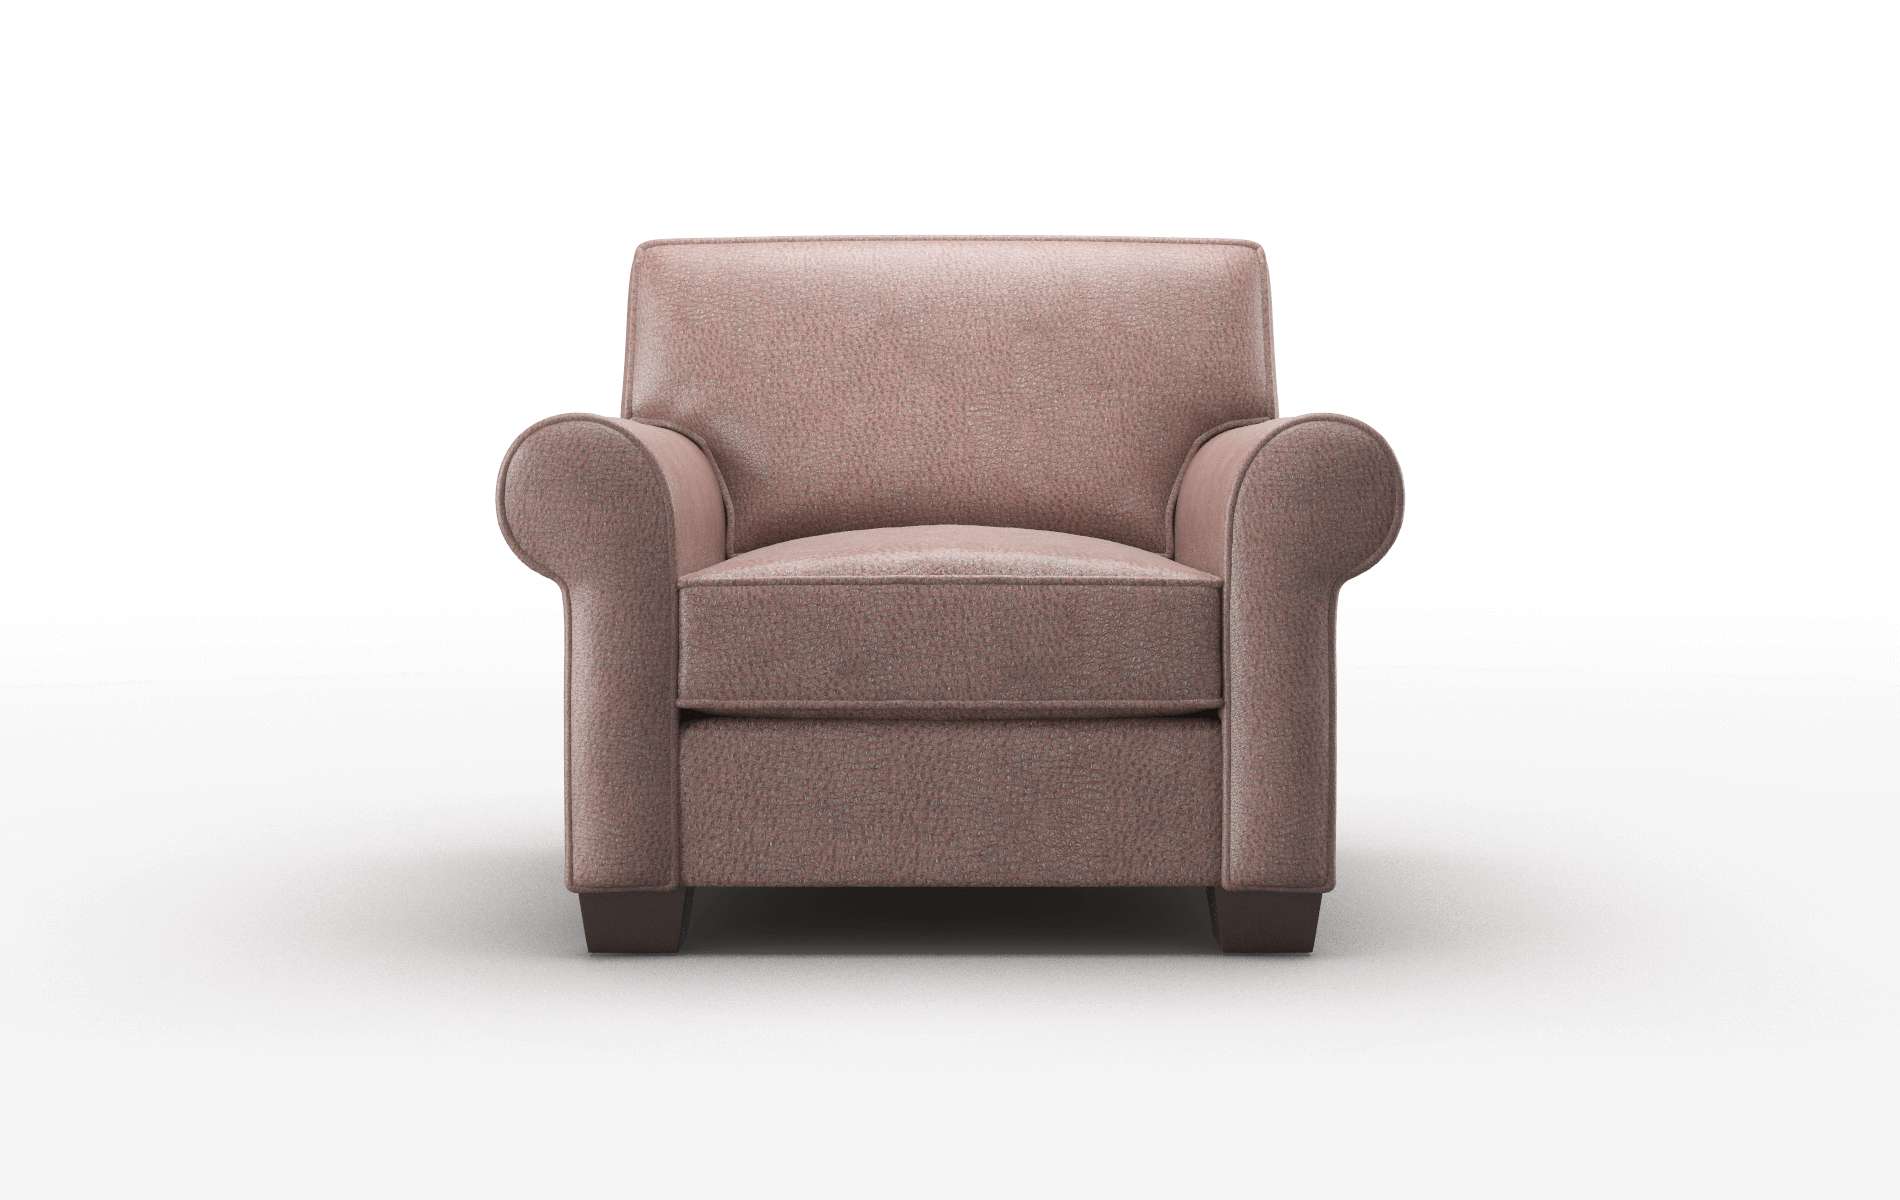 Isabel Ford Brown chair espresso legs